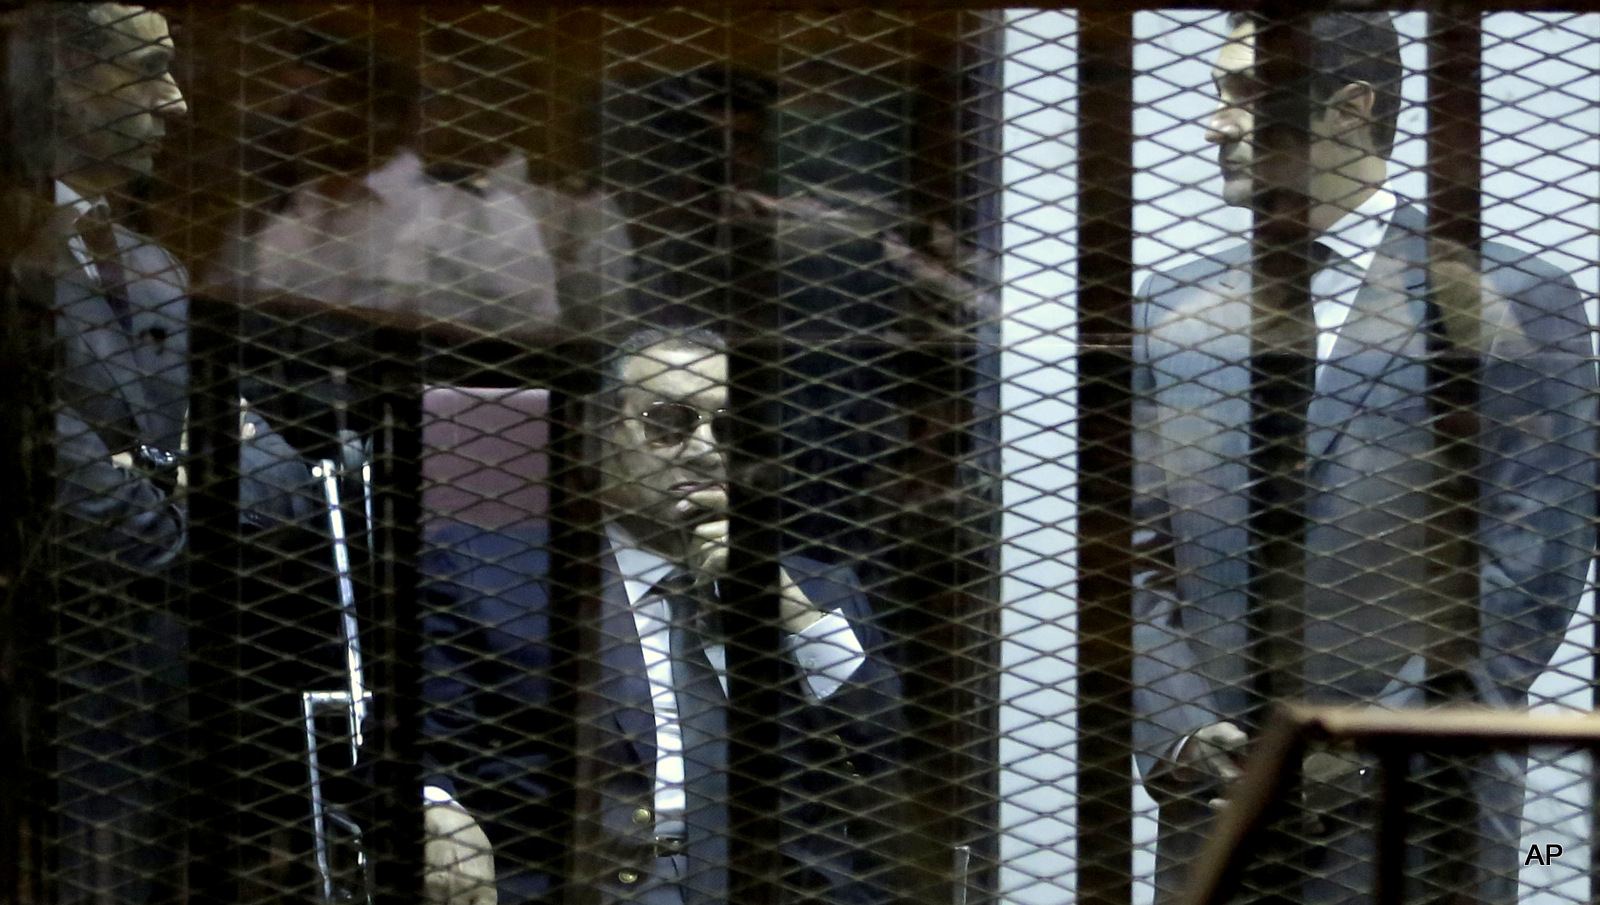 Former Egyptian President Hosni Mubarak, seated, and his two sons Gamal Mubarak, left, and Alaa Mubarak, right, attend the verdict of the corruption case dubbed by the Egyptian media as the "presidential palaces" affair concerning charges that Mubarak and his two sons embezzled millions of dollars' worth of state funds over the course of a decade in a courtroom in Cairo, Egypt, Saturday, May 9, 2015. Egypt's deposed leader Hosni Mubarak and his two sons were sentenced Saturday to three years in prison and a fine in a retrial on corruption charges they faced earlier. It wasn't immediately clear whether it will include time he's already served since his country's 2011 revolt.